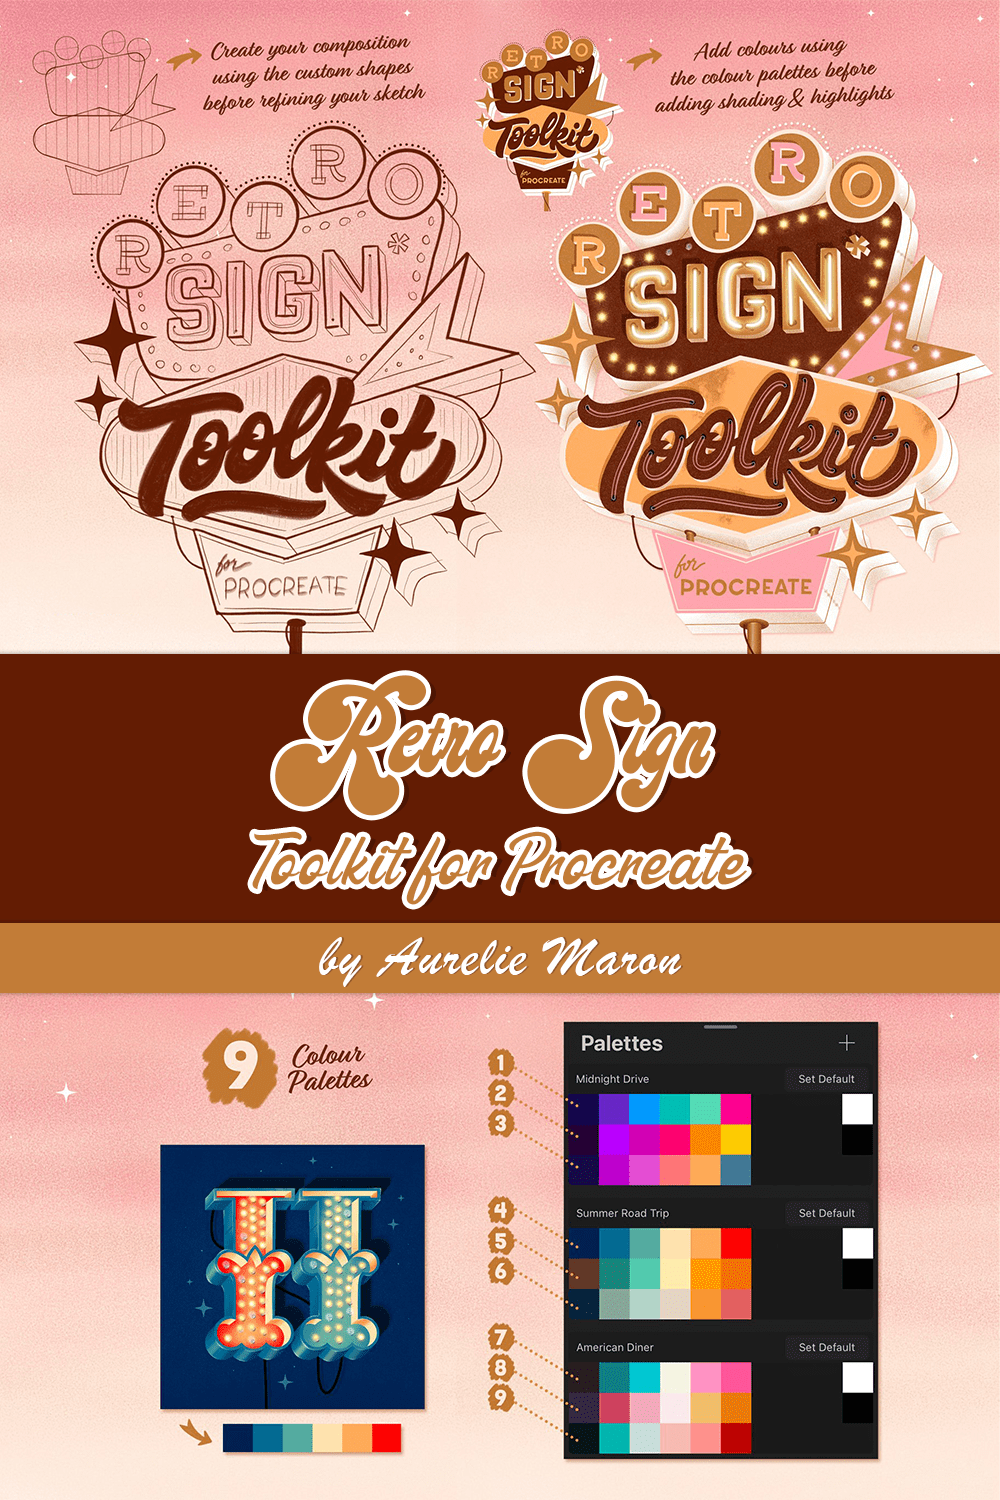 9 colour palettes of retro sign toolkit.